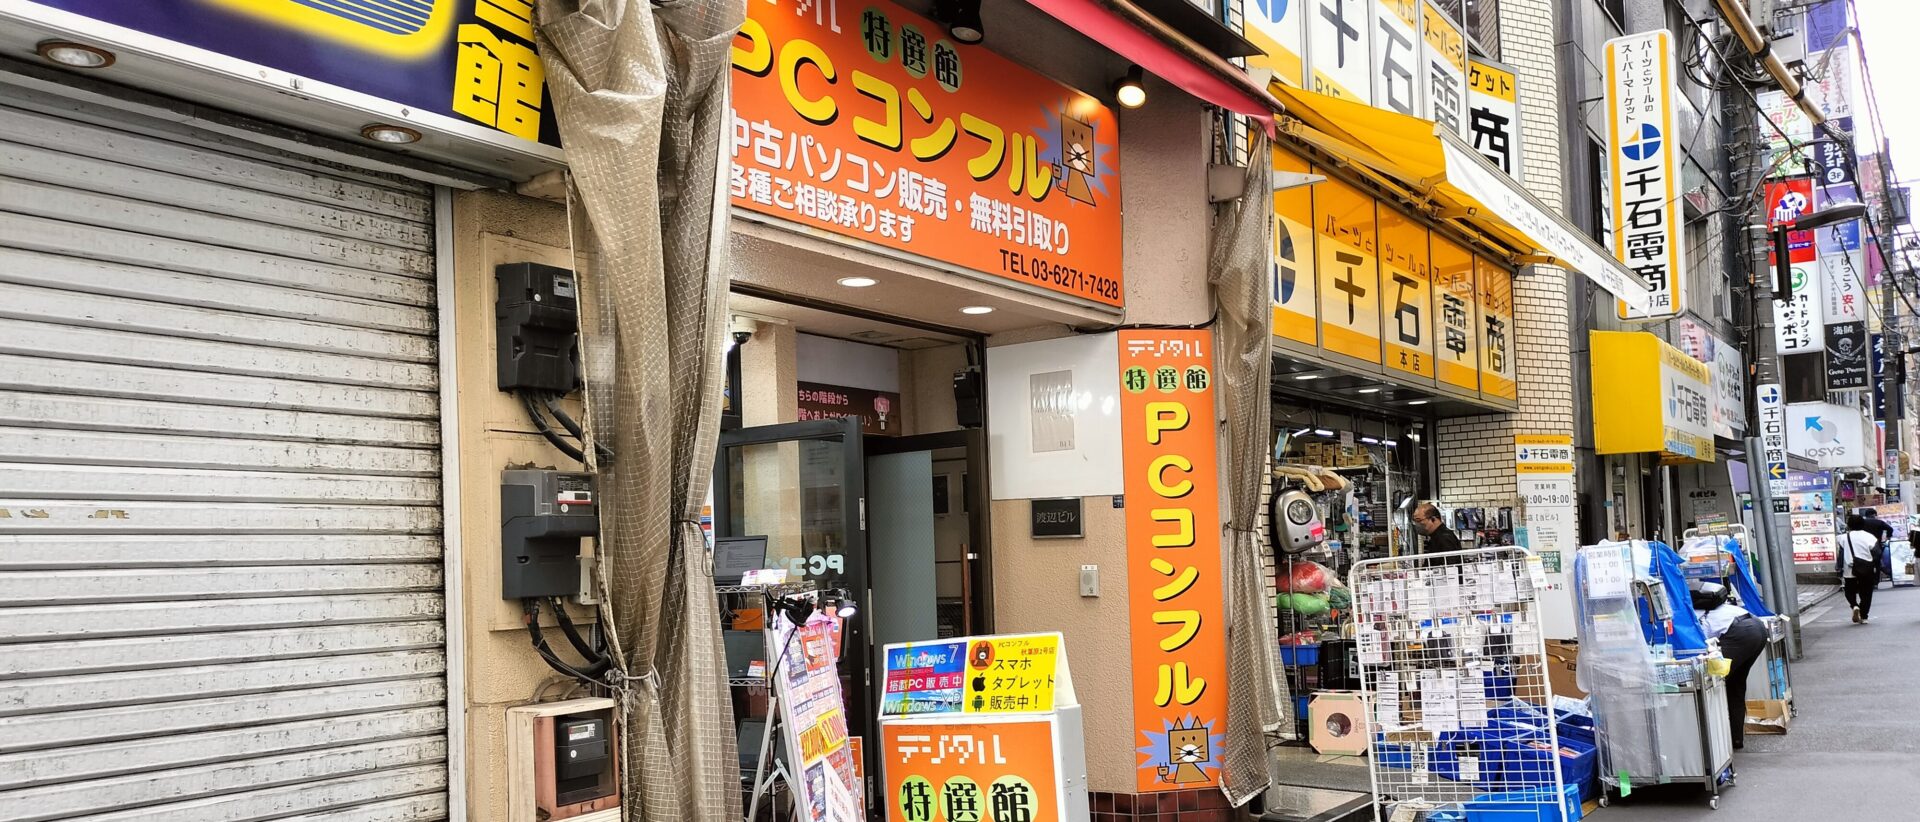 PCコンフル 秋葉原2号店